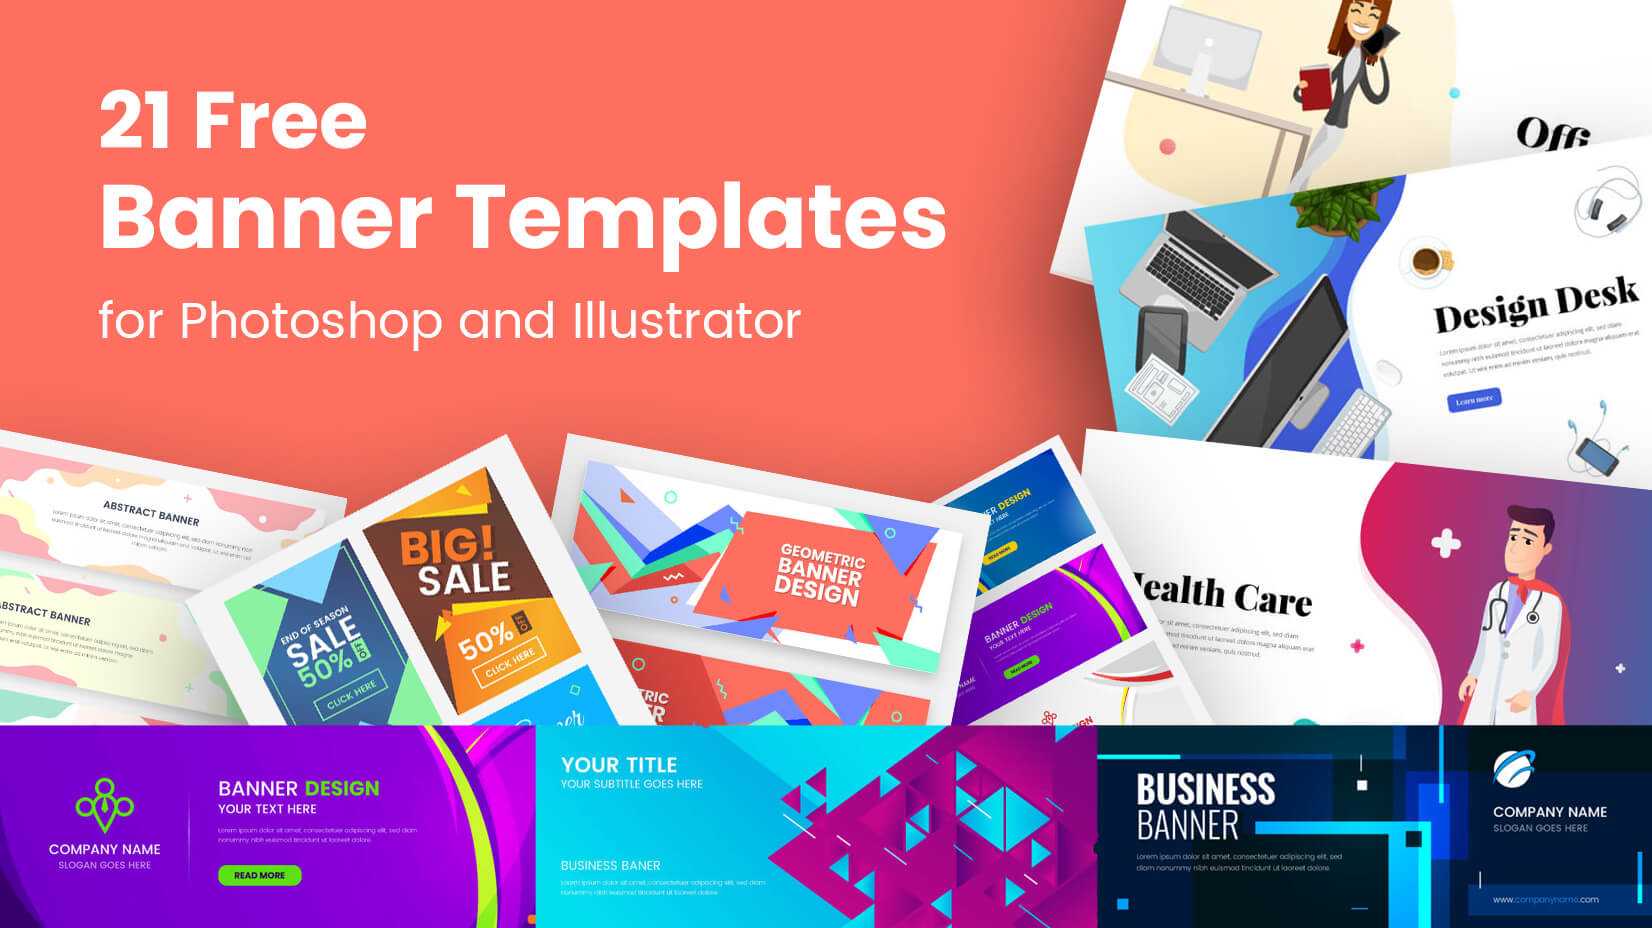 21 Free Banner Templates For Photoshop And Illustrator Within Banner Template For Photoshop